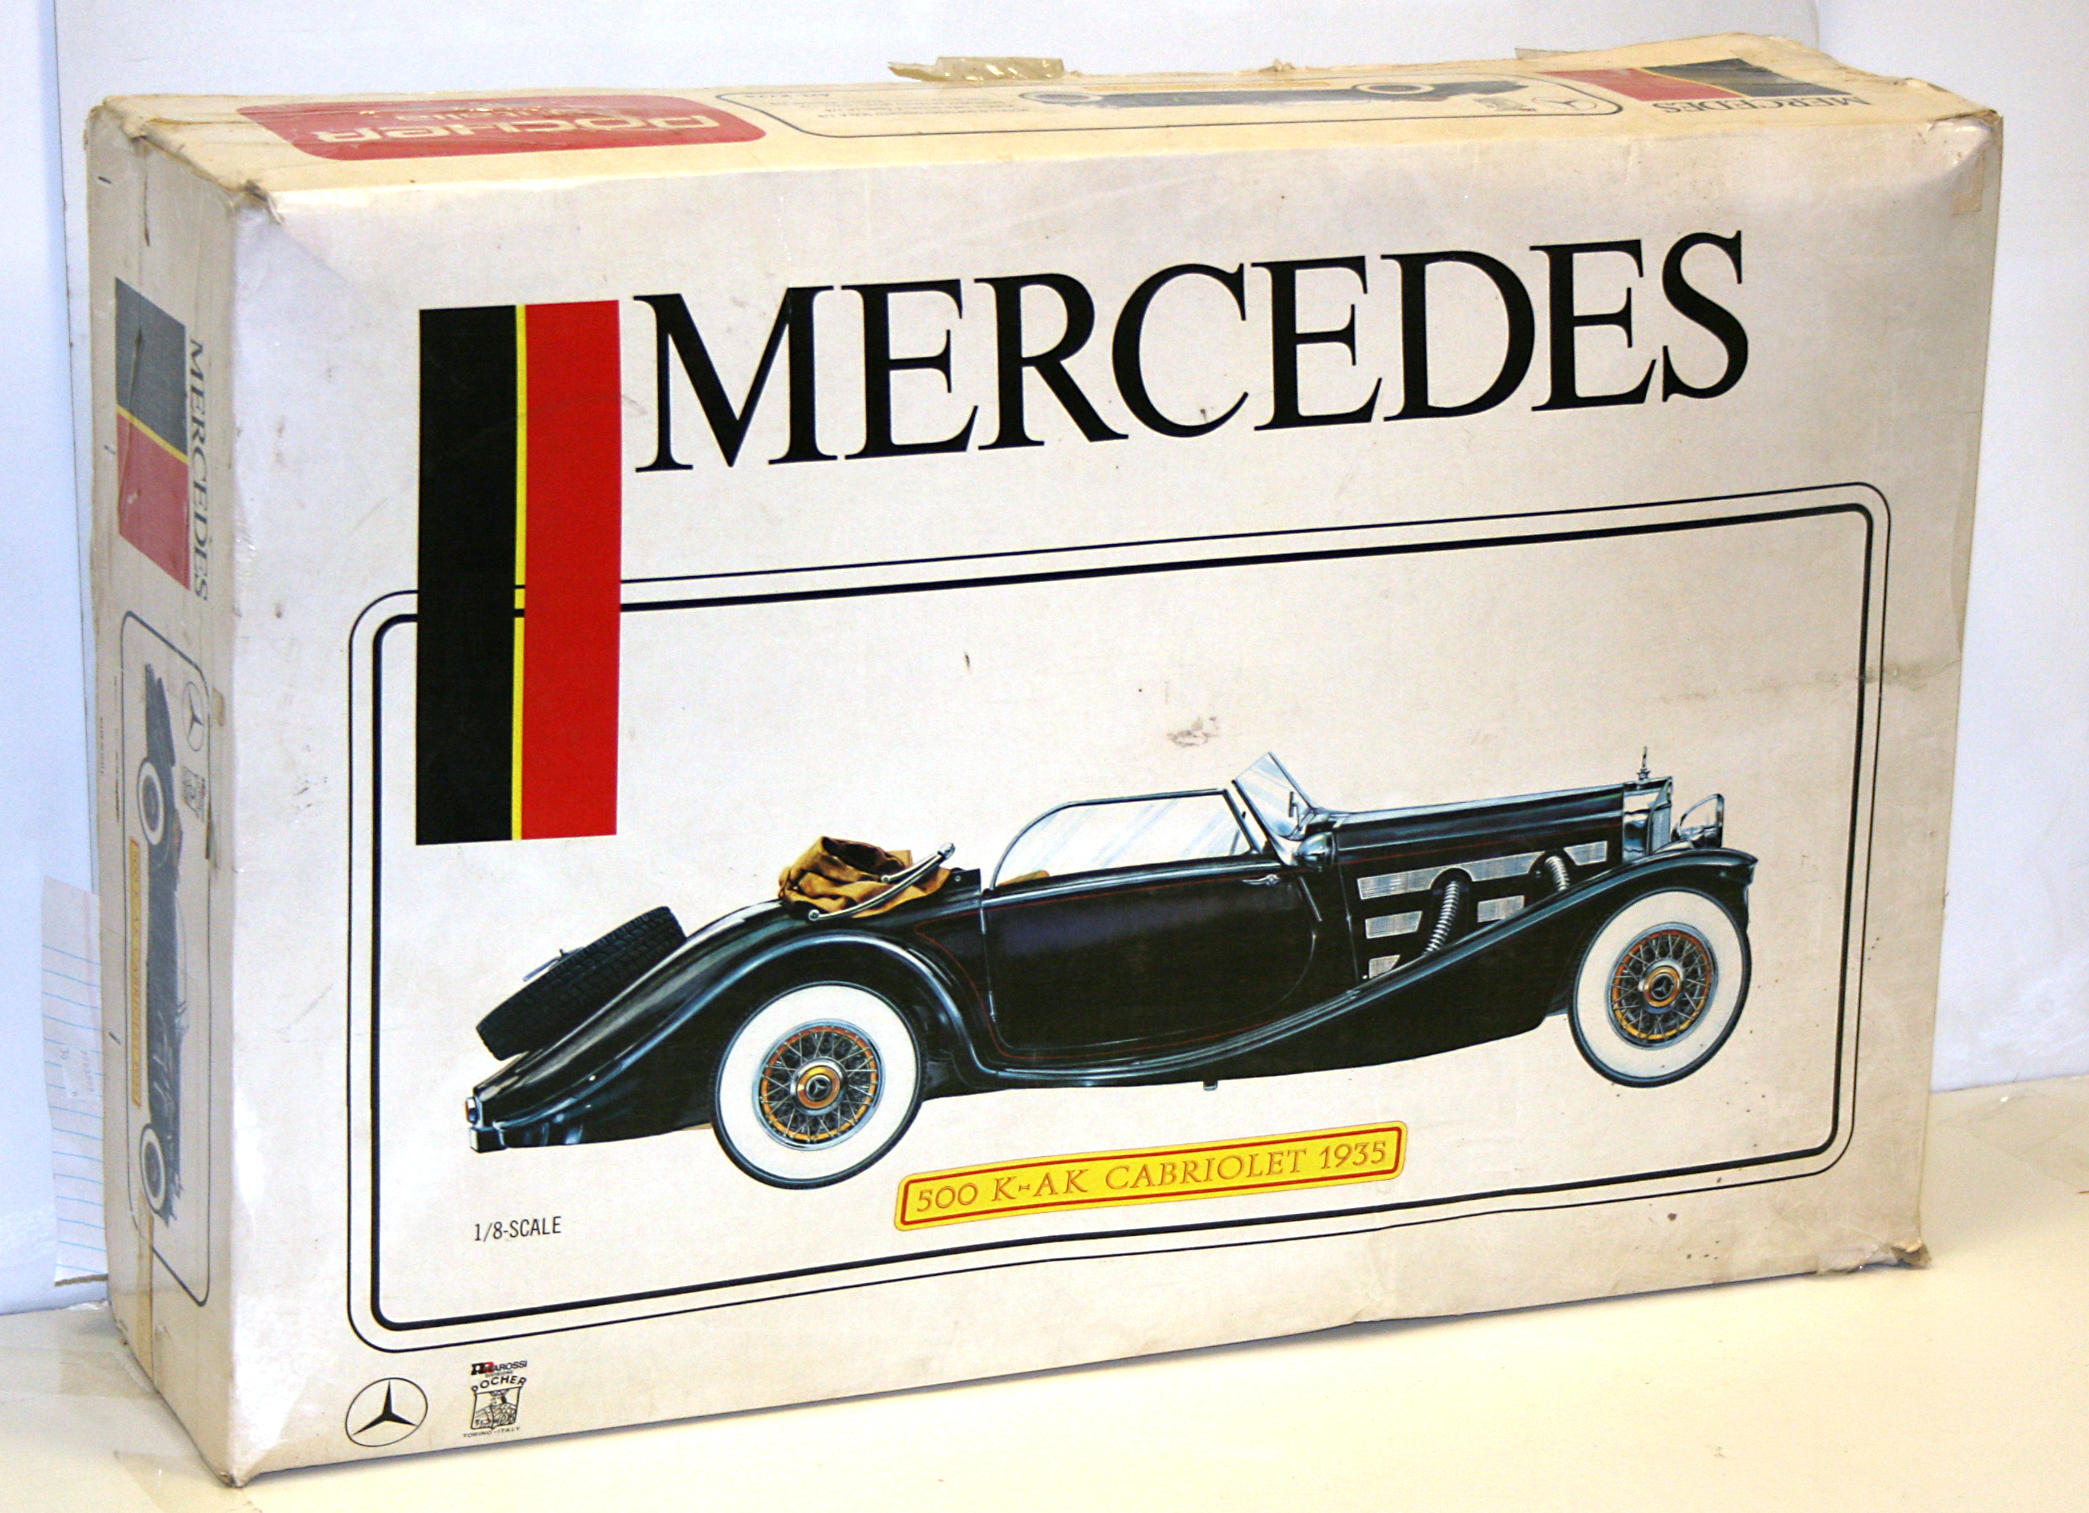 A 1935 Mercedes 500 K-AK Cabriolet boxed 1:8 scale model, by Pocher, Italian,